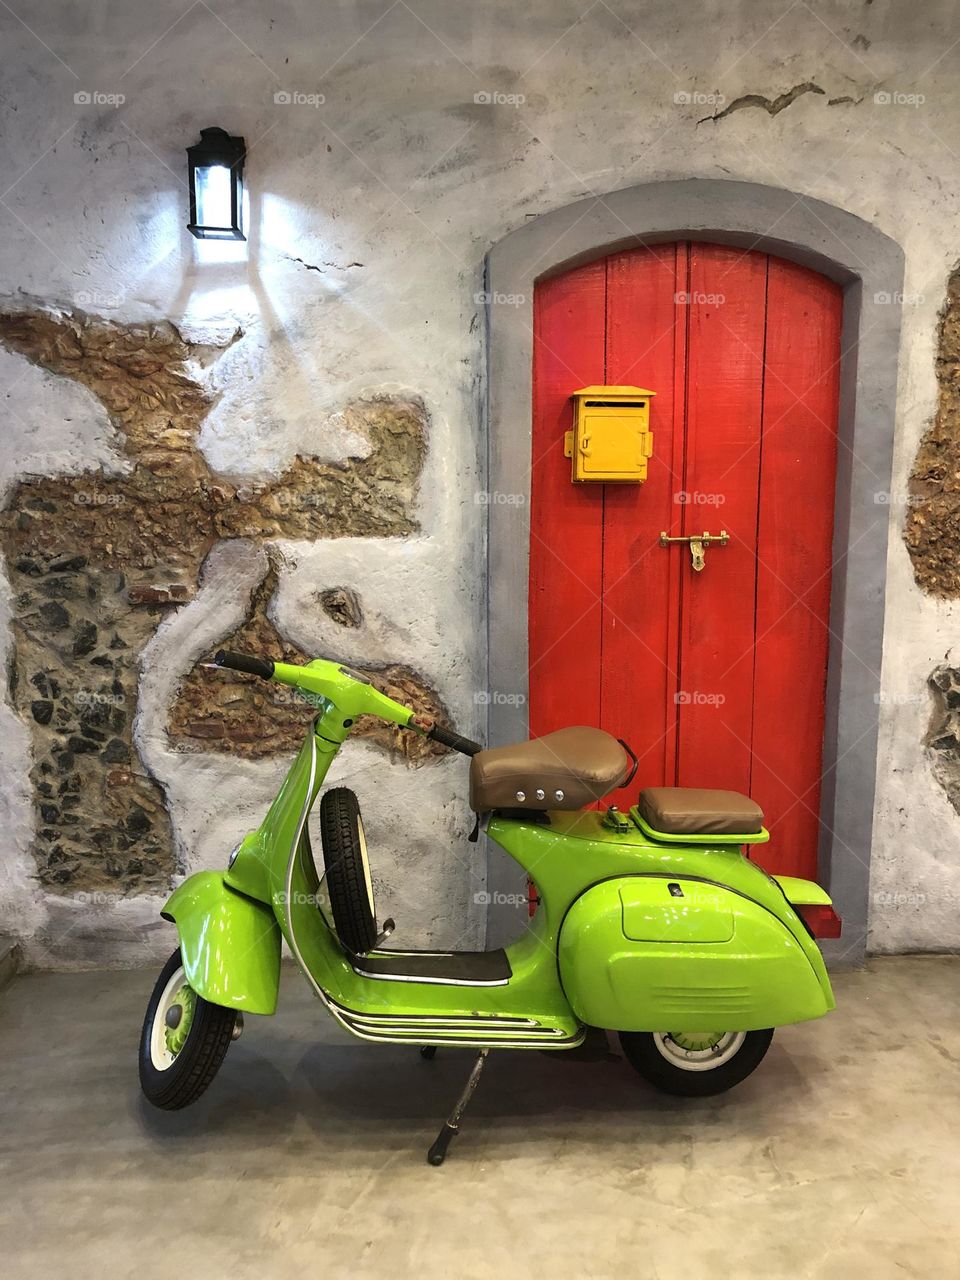 Scooter bike and the wall 